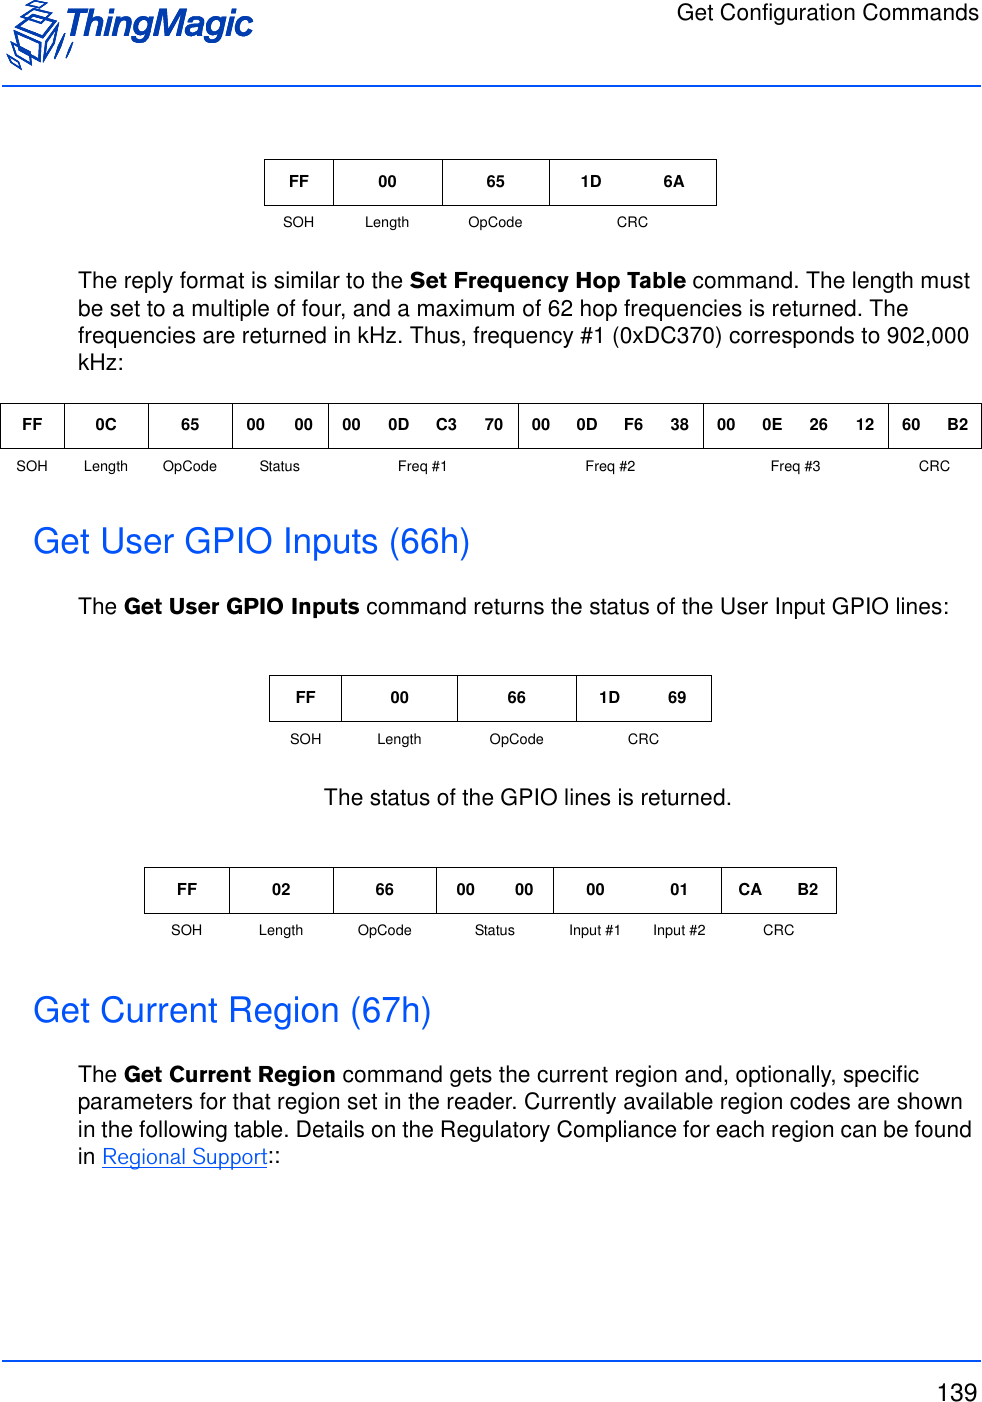 Get Configuration Commands139The reply format is similar to the Set Frequency Hop Table command. The length must be set to a multiple of four, and a maximum of 62 hop frequencies is returned. The frequencies are returned in kHz. Thus, frequency #1 (0xDC370) corresponds to 902,000 kHz:Get User GPIO Inputs (66h)The Get User GPIO Inputs command returns the status of the User Input GPIO lines:The status of the GPIO lines is returned. Get Current Region (67h) The Get Current Region command gets the current region and, optionally, specific parameters for that region set in the reader. Currently available region codes are shown in the following table. Details on the Regulatory Compliance for each region can be found in Regional Support::FF 00 65 1D 6ASOH Length OpCode CRCFF 0C 65 00 00 00 0D C3 70 00 0D F6 38 00 0E 26 12 60 B2SOH Length OpCode Status Freq #1 Freq #2 Freq #3 CRCFF 00 66 1D 69SOH Length OpCode CRCFF 02 66 00 00 00 01 CA B2SOH Length OpCode Status Input #1 Input #2 CRC